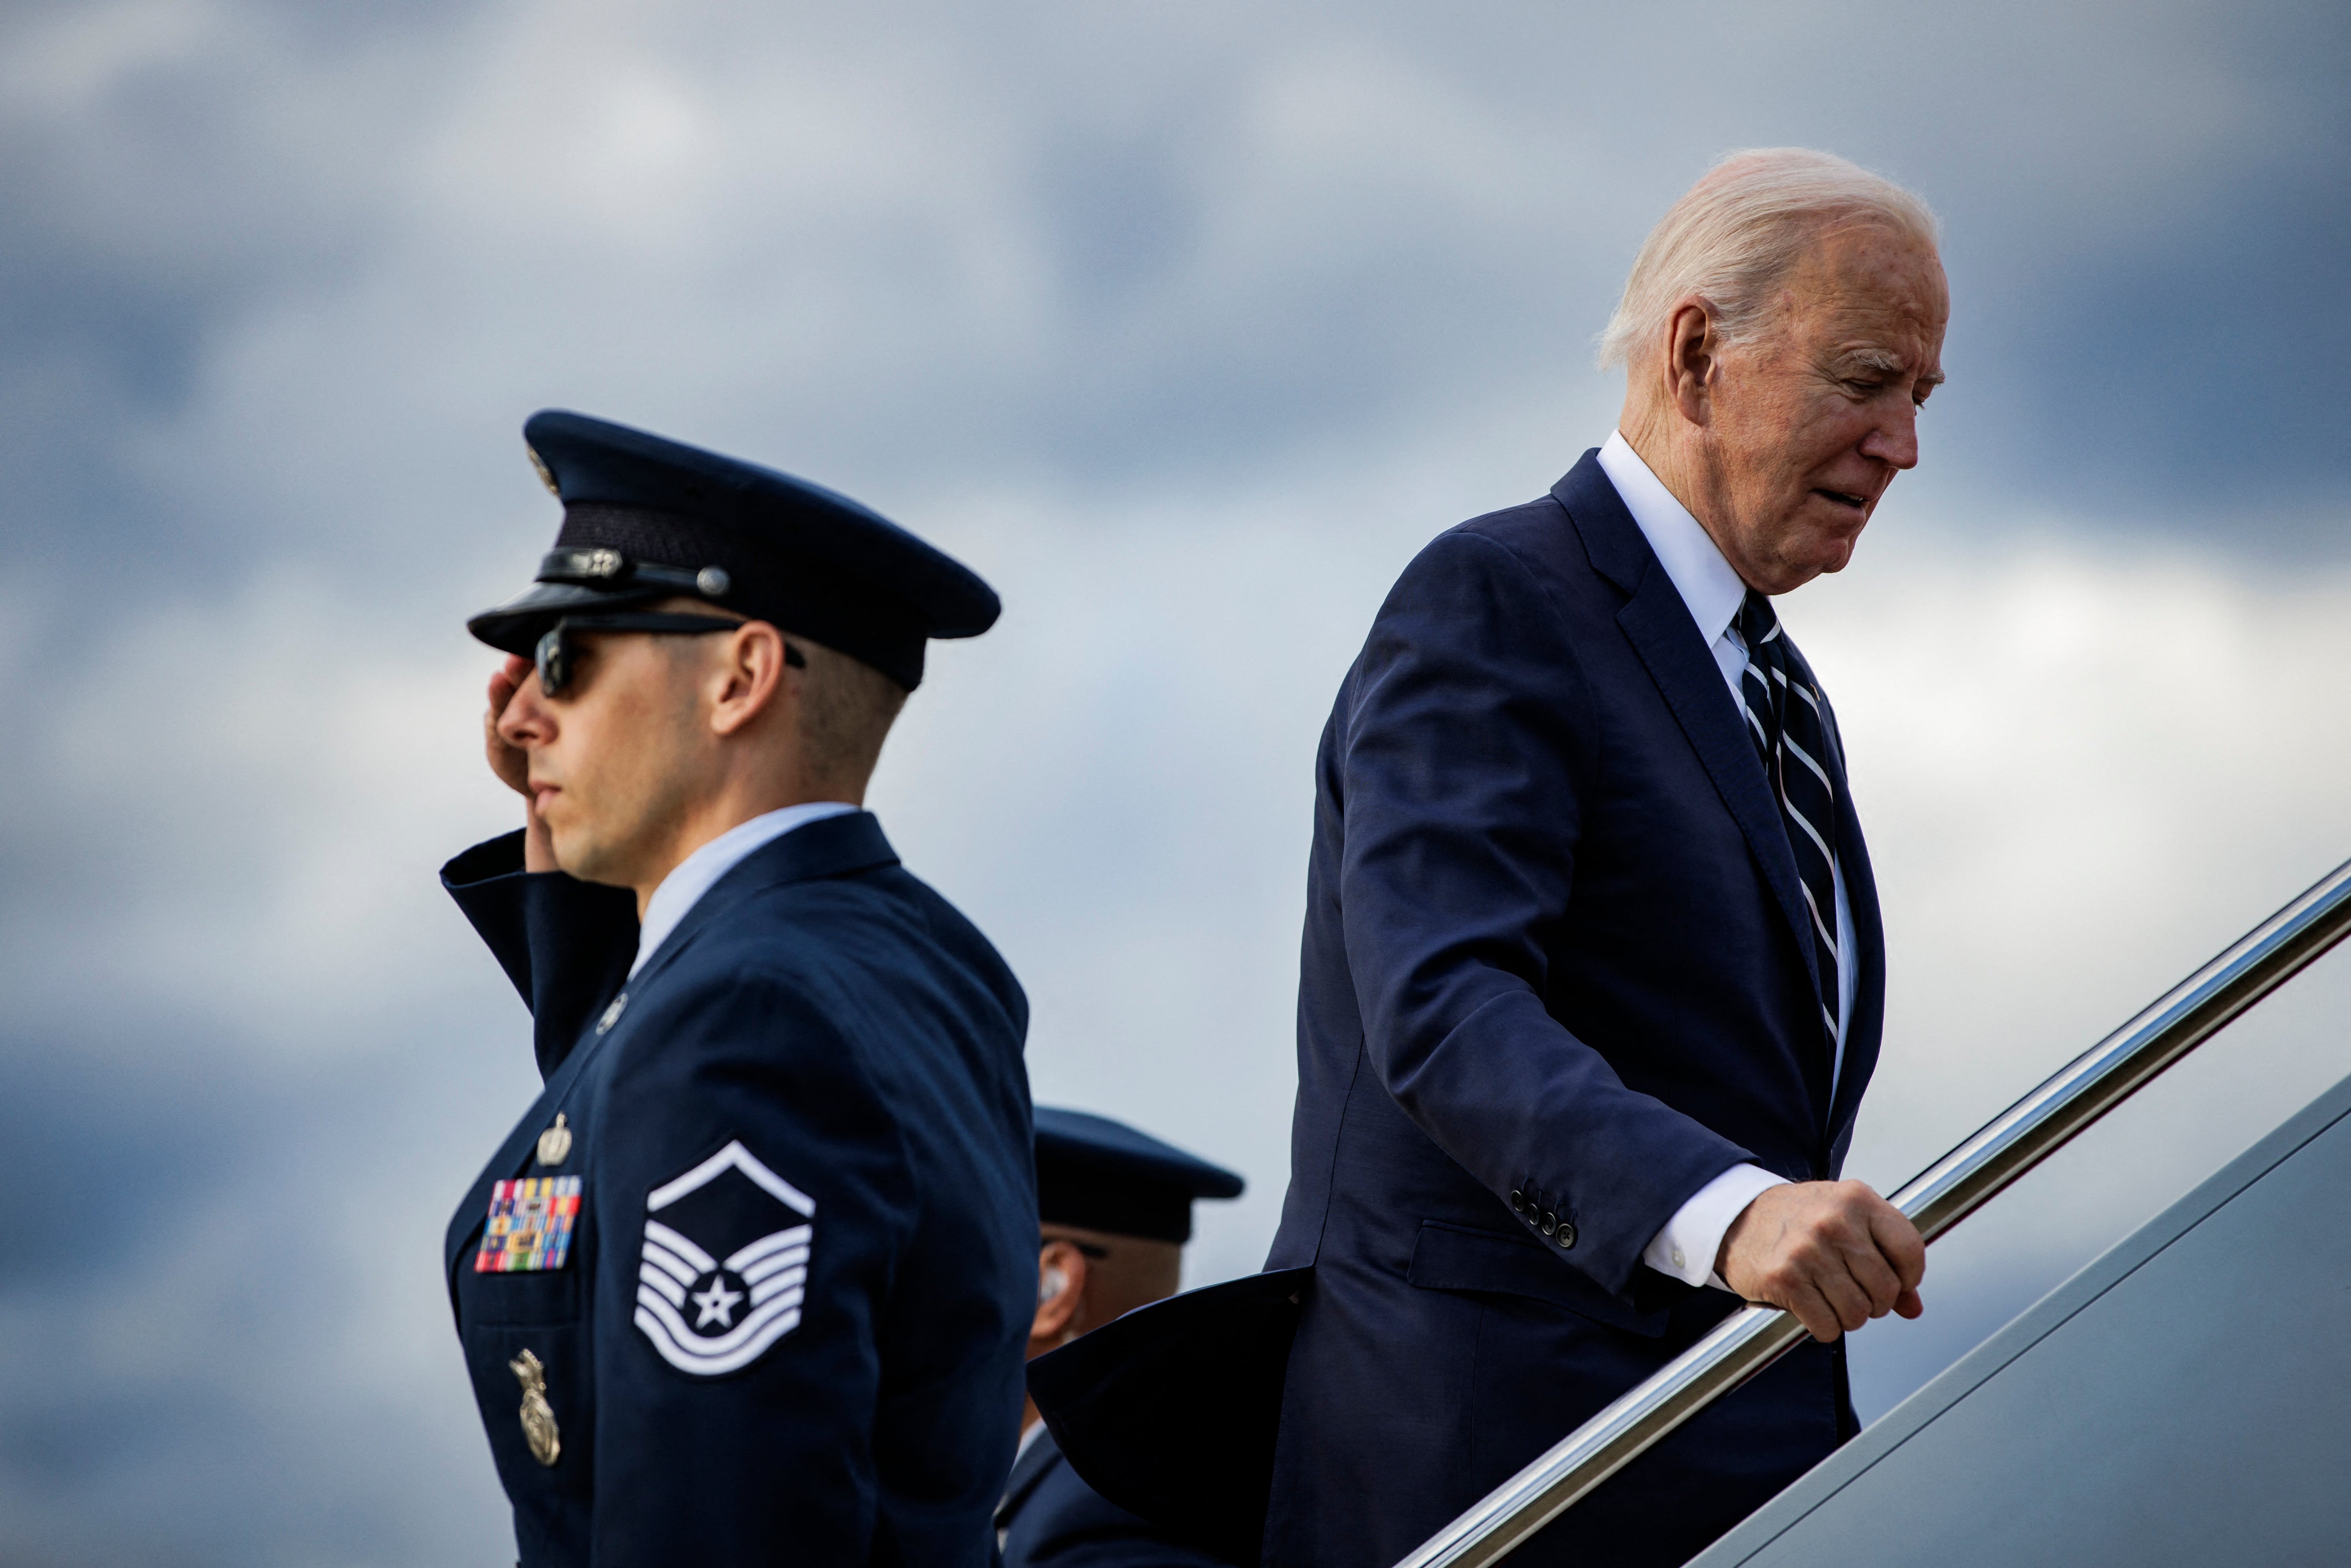 President Joe Biden, pictured boarding Air Force One to Delaware on Friday, will now return to Washington, DC to consult with his national security team